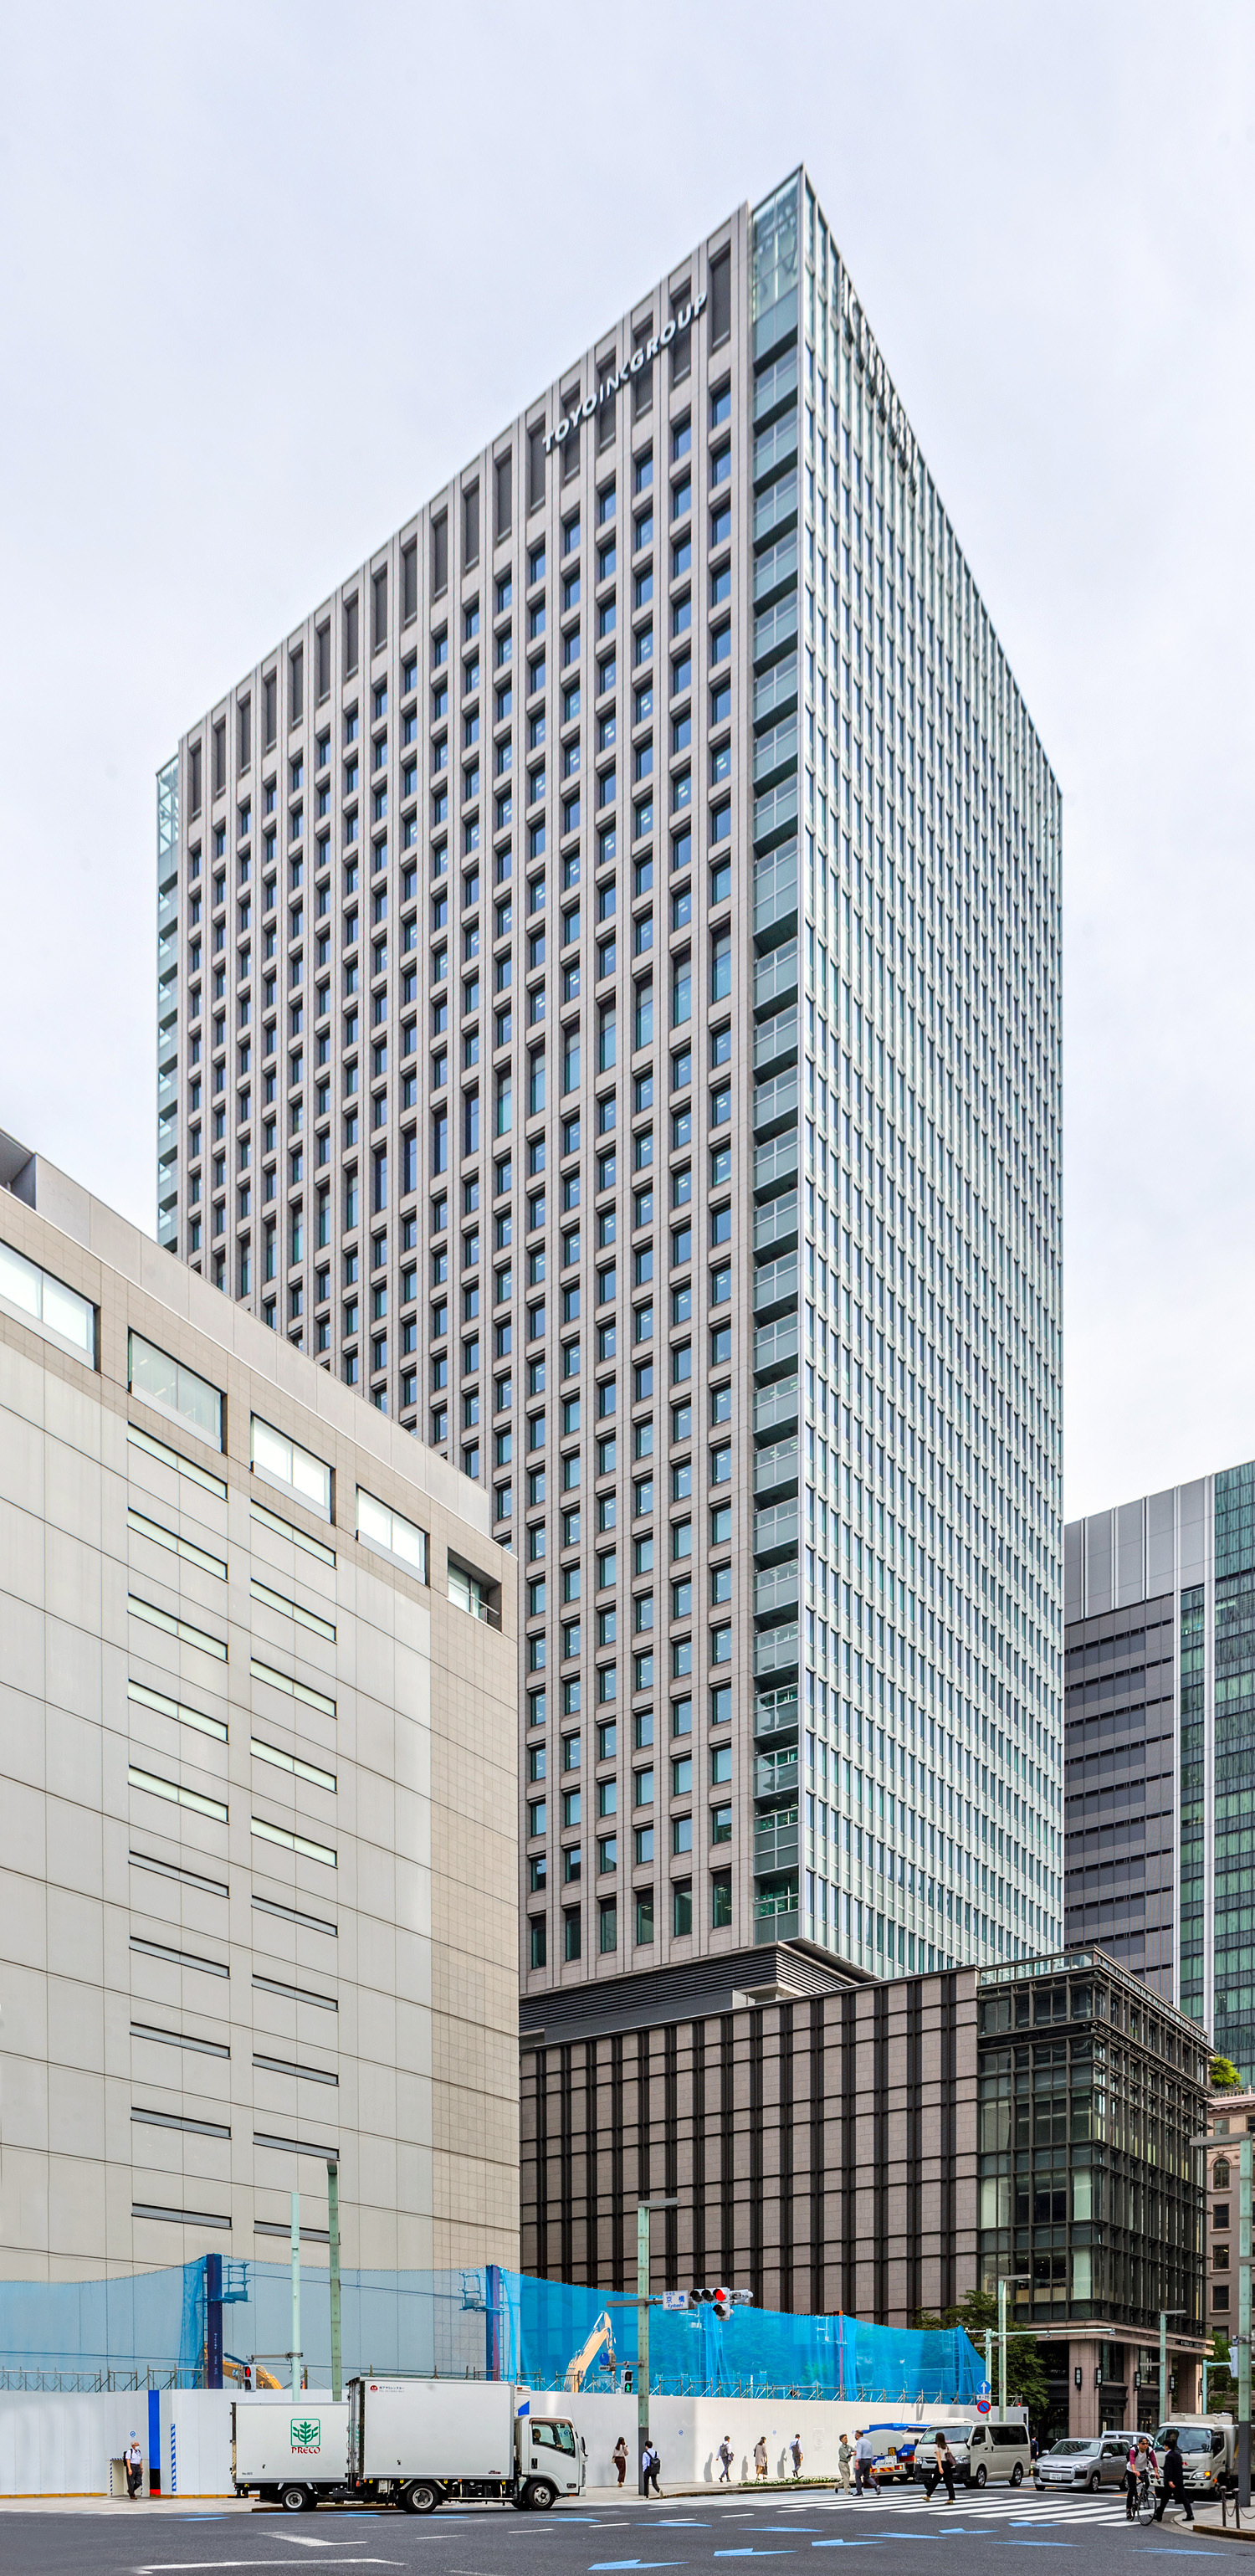 Kyobashi Edogrand, Tokyo - View from the south. © Mathias Beinling